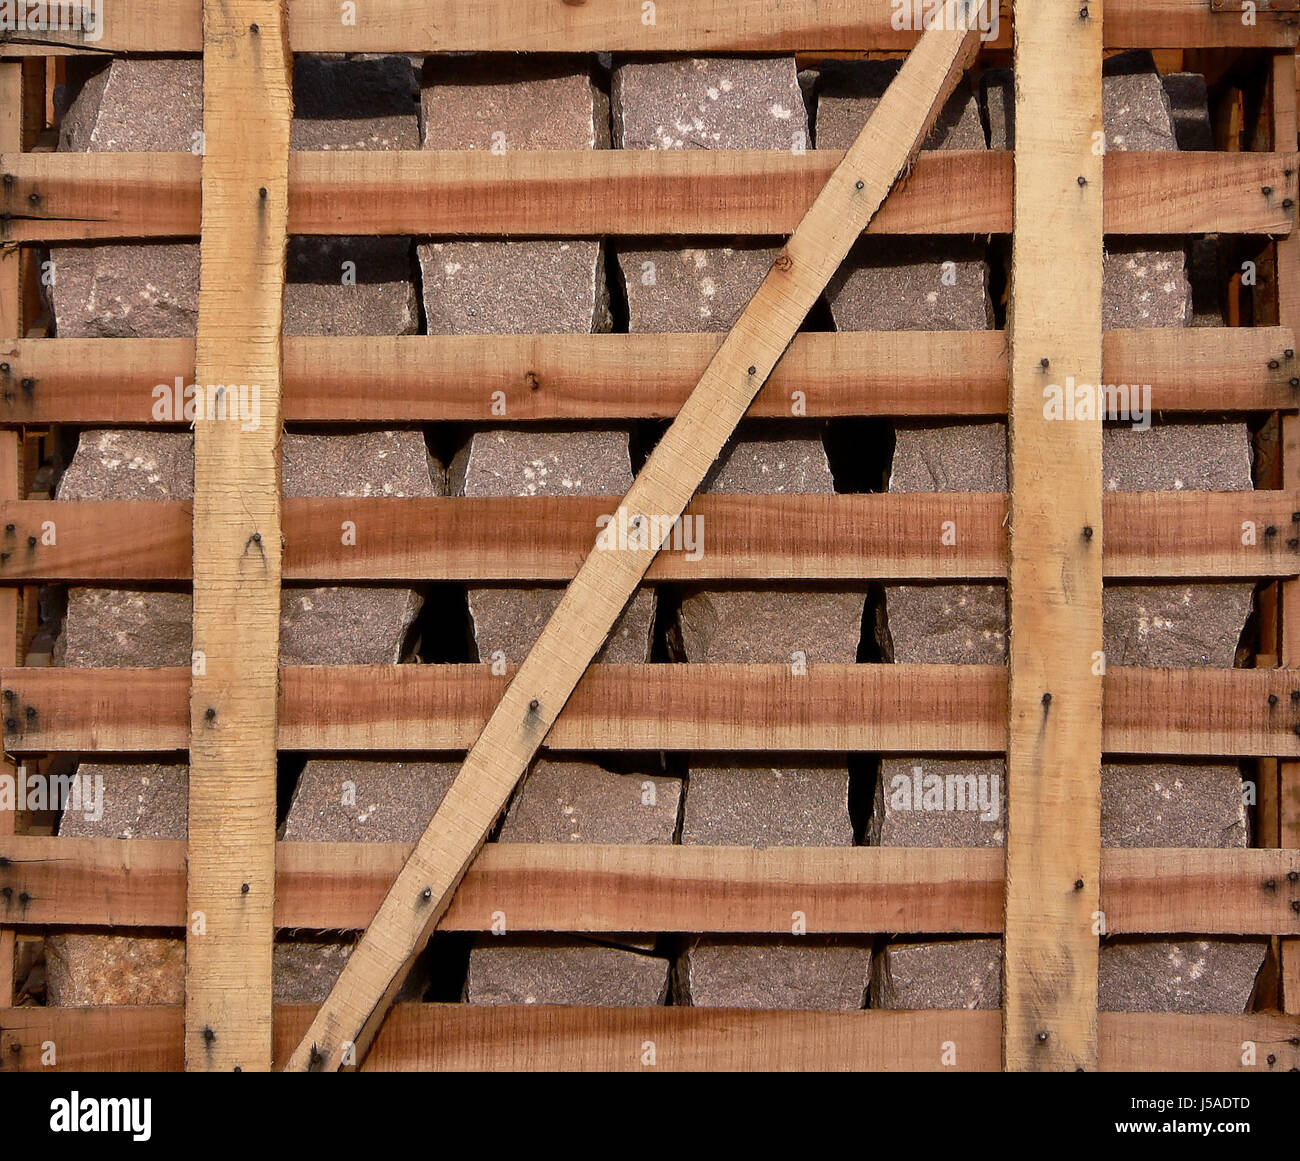 plaster transport means of conveyance bouldering mosaics mosaic floor covering Stock Photo